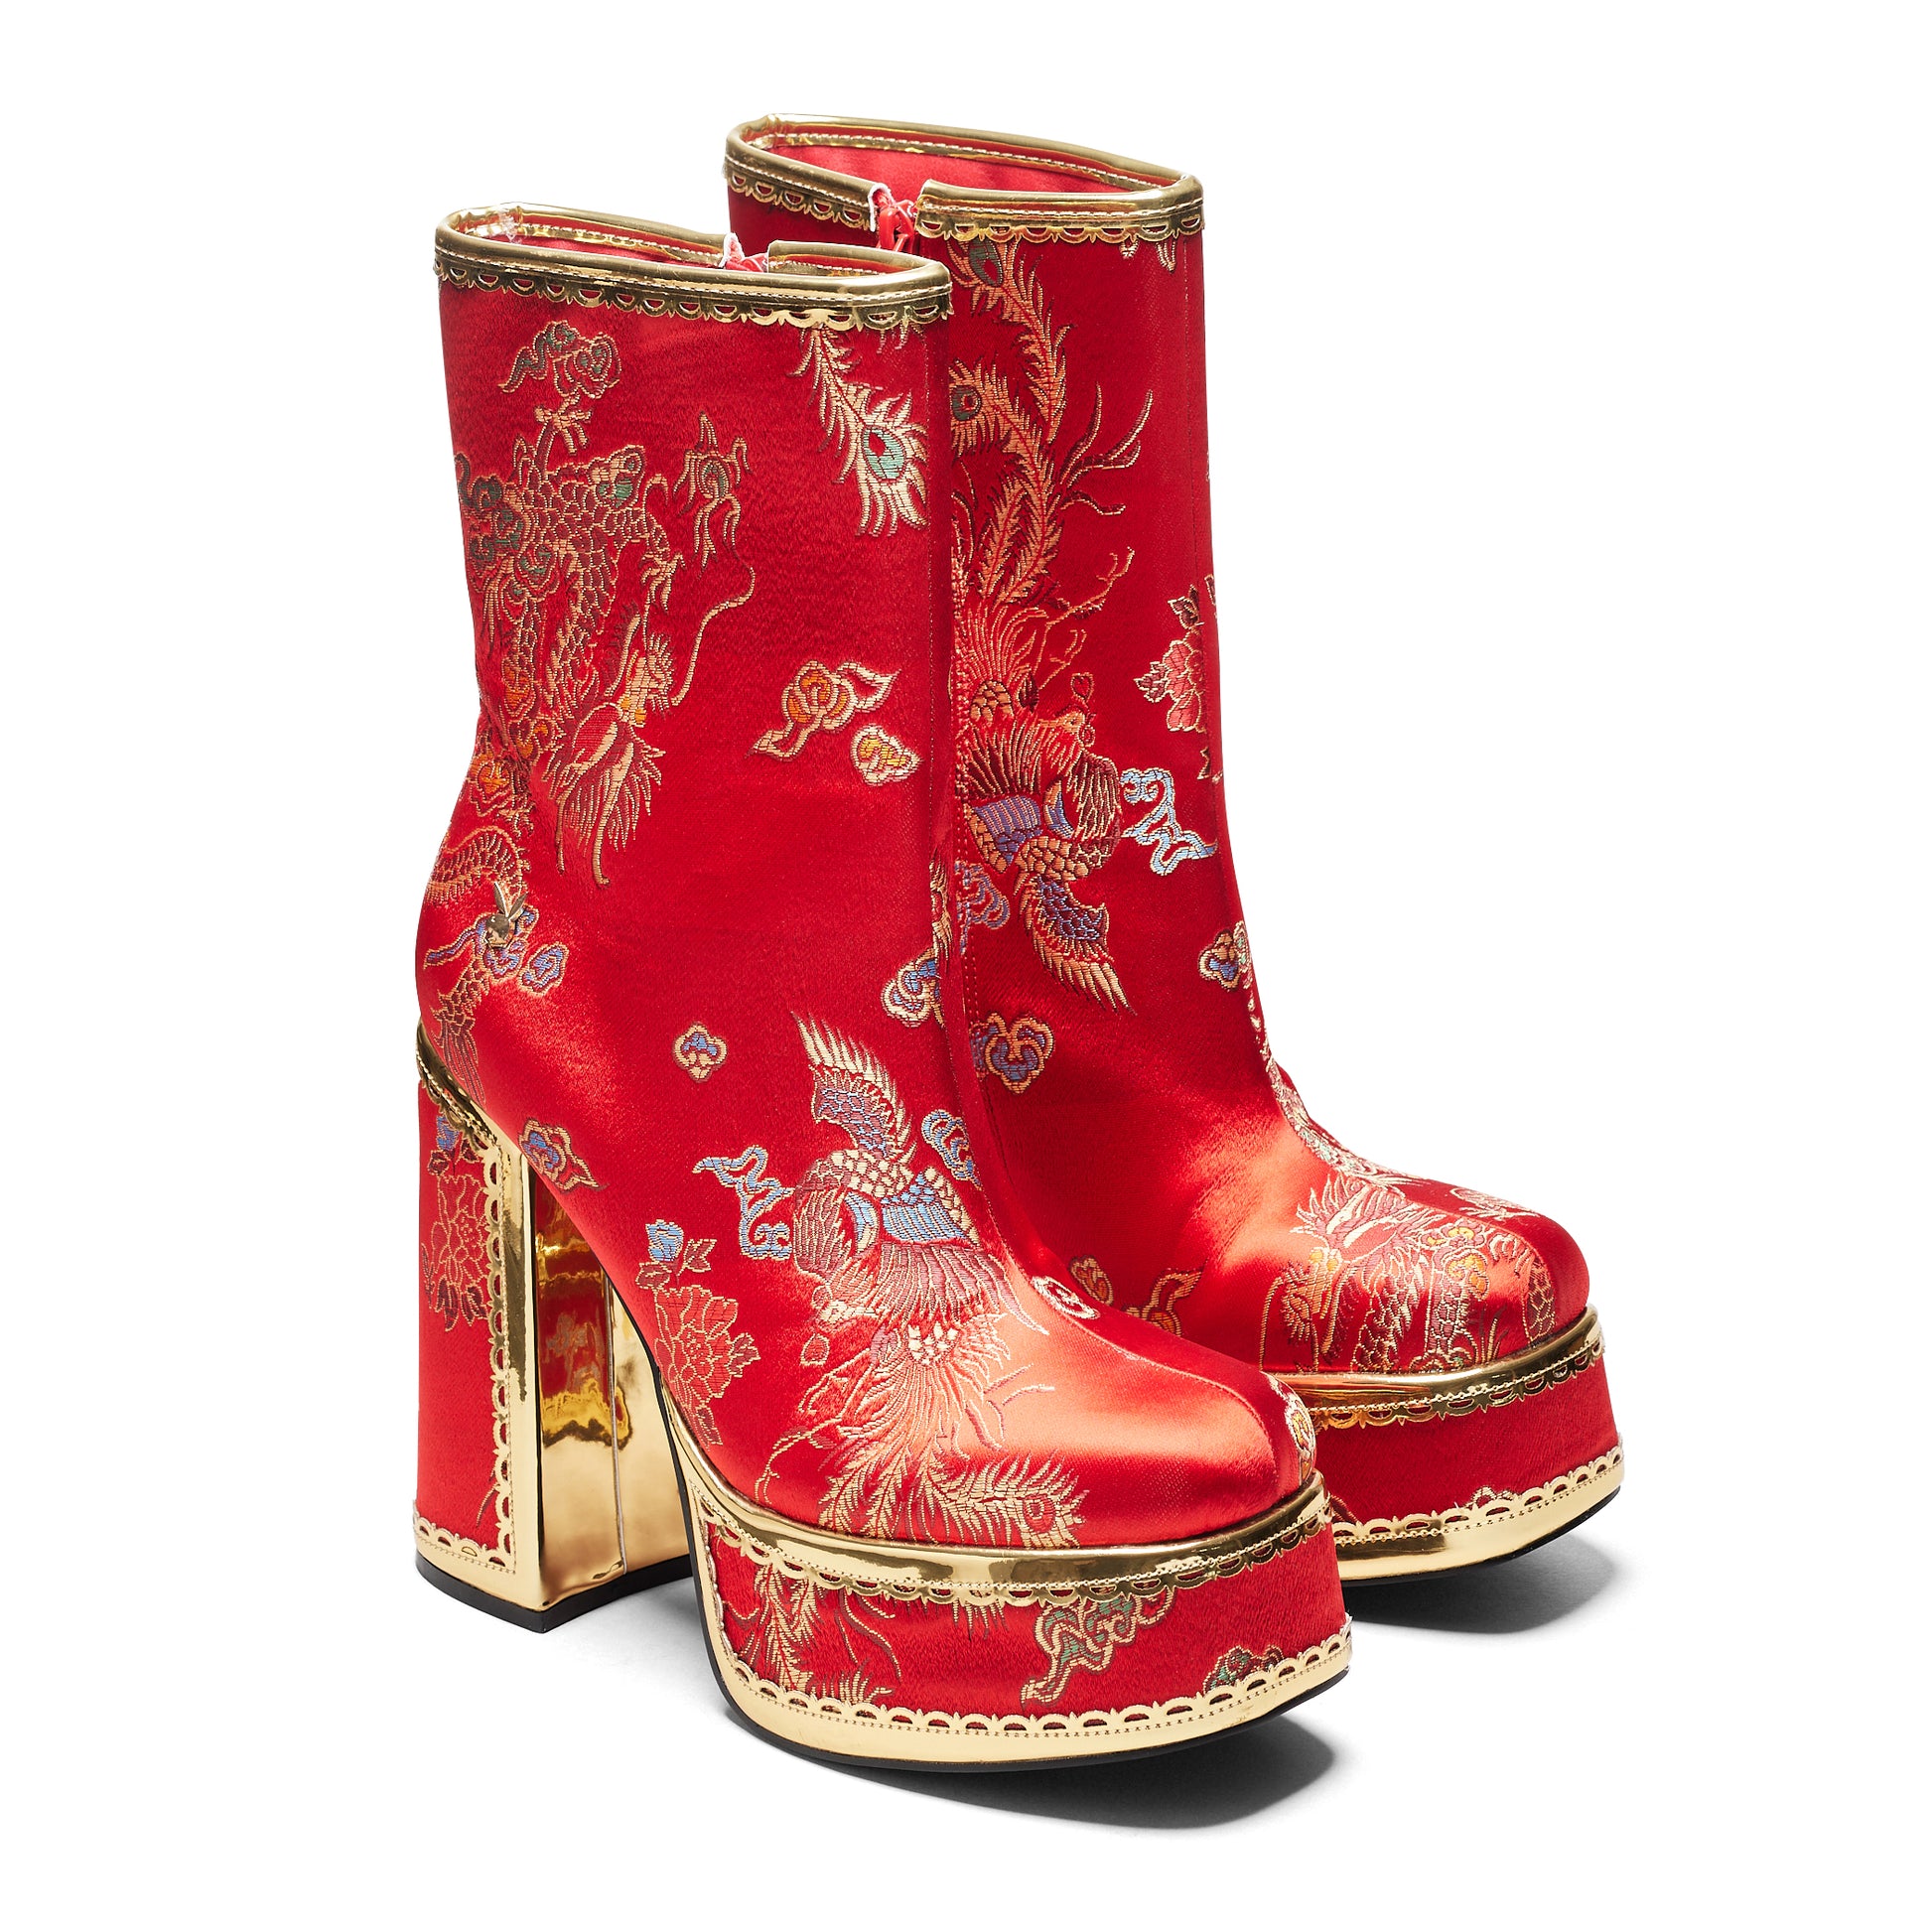 The Ornate Soul Playboy Red Heeled Boots - Ankle Boots - KOI Footwear - Red - Three-Quarter View